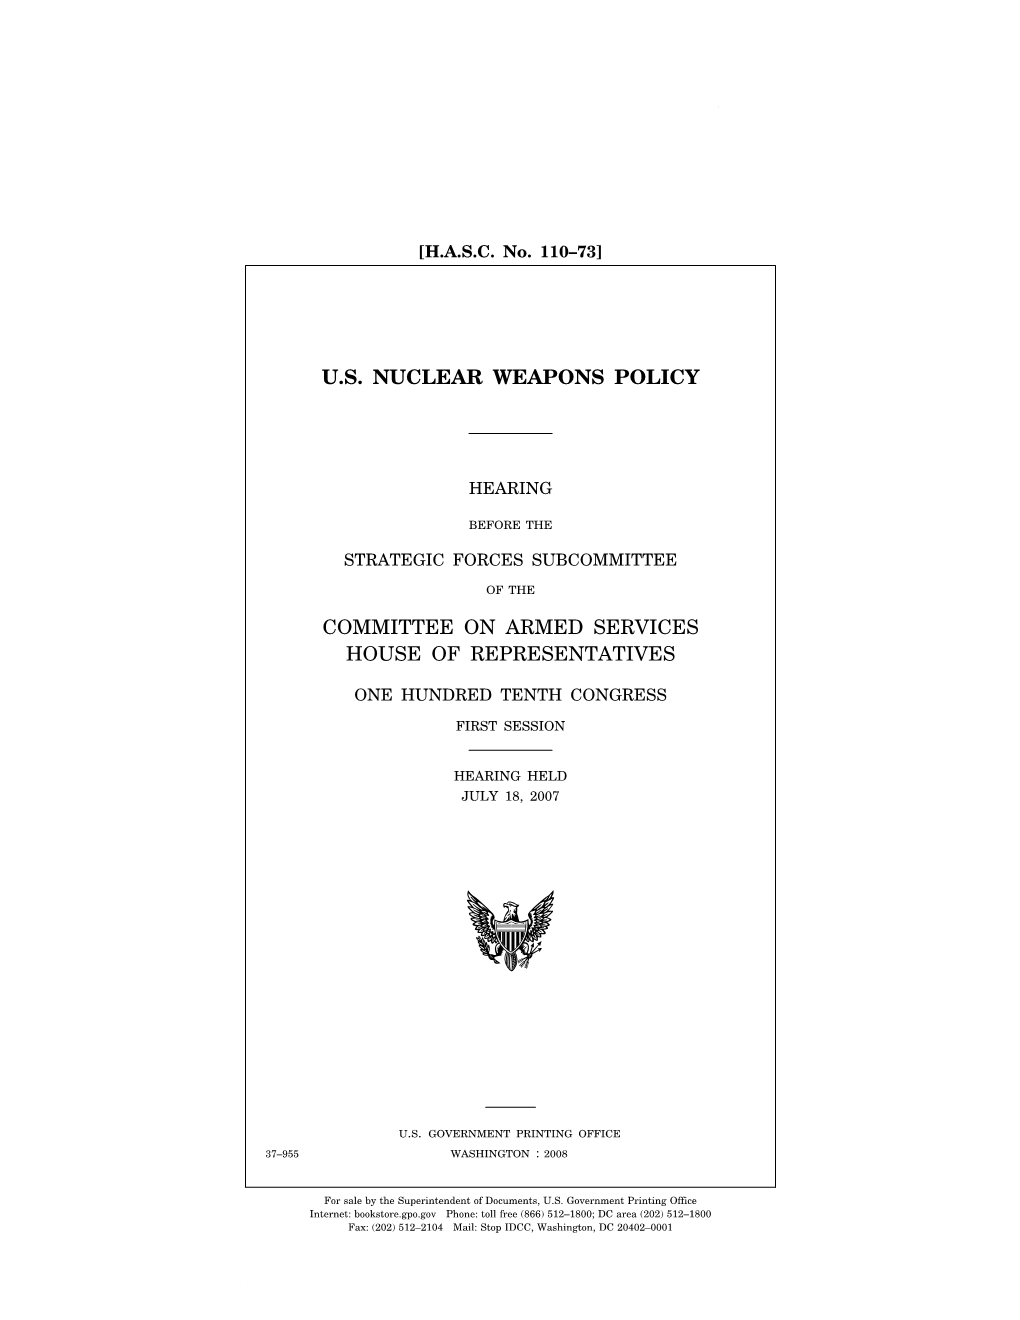 U.S. Nuclear Weapons Policy Committee on Armed